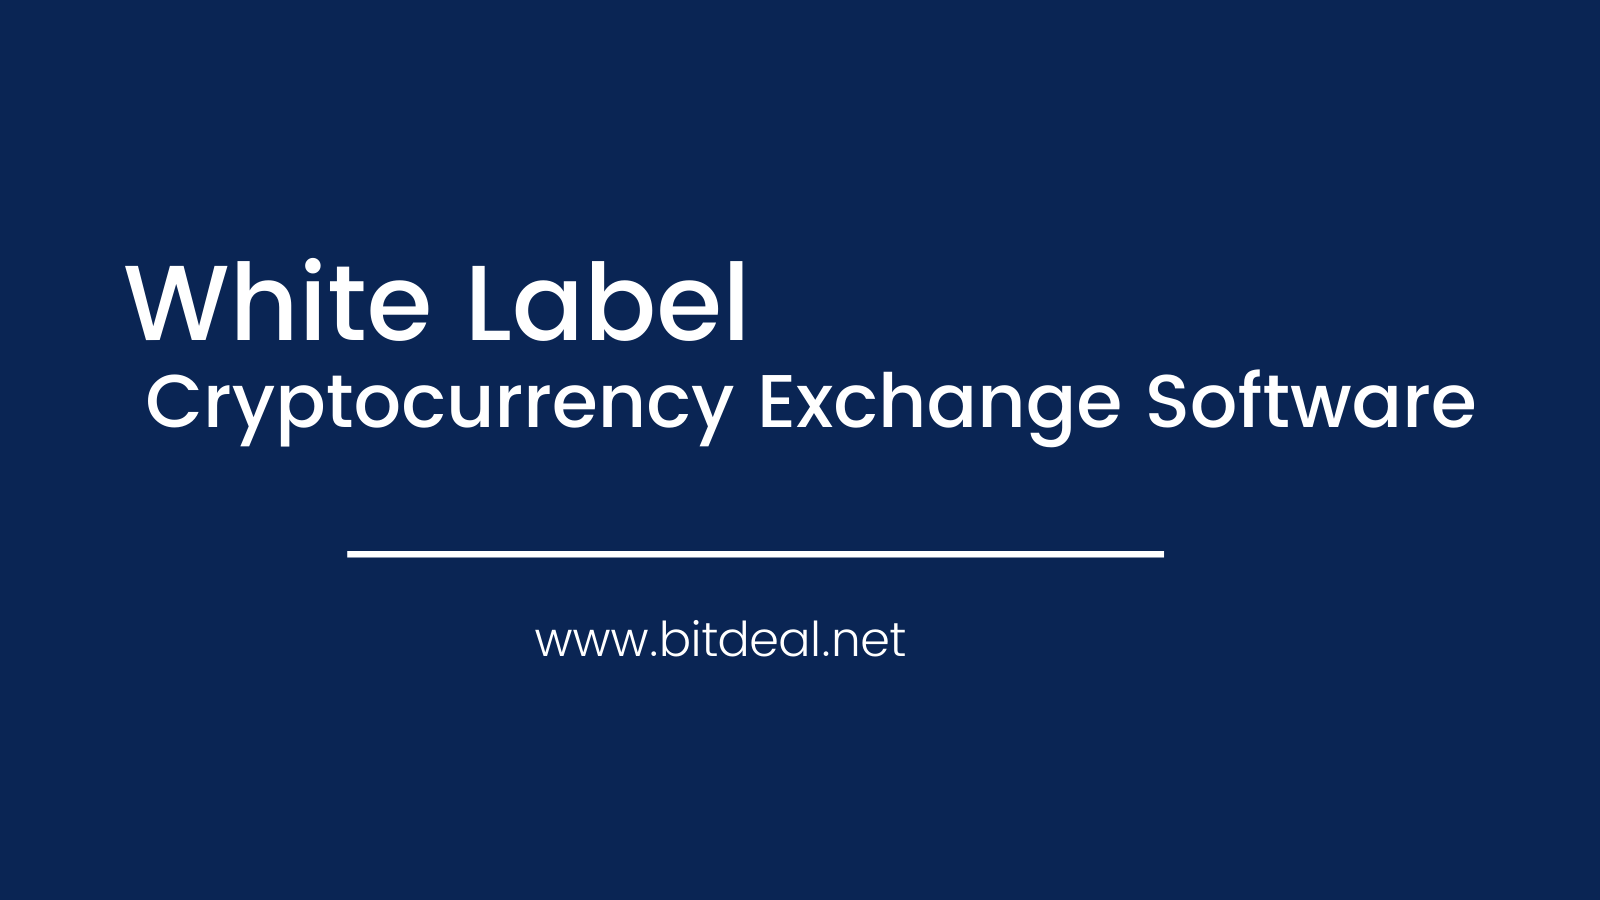 Article about Prominent Components and Features in Cryptocurrency Exchange Software